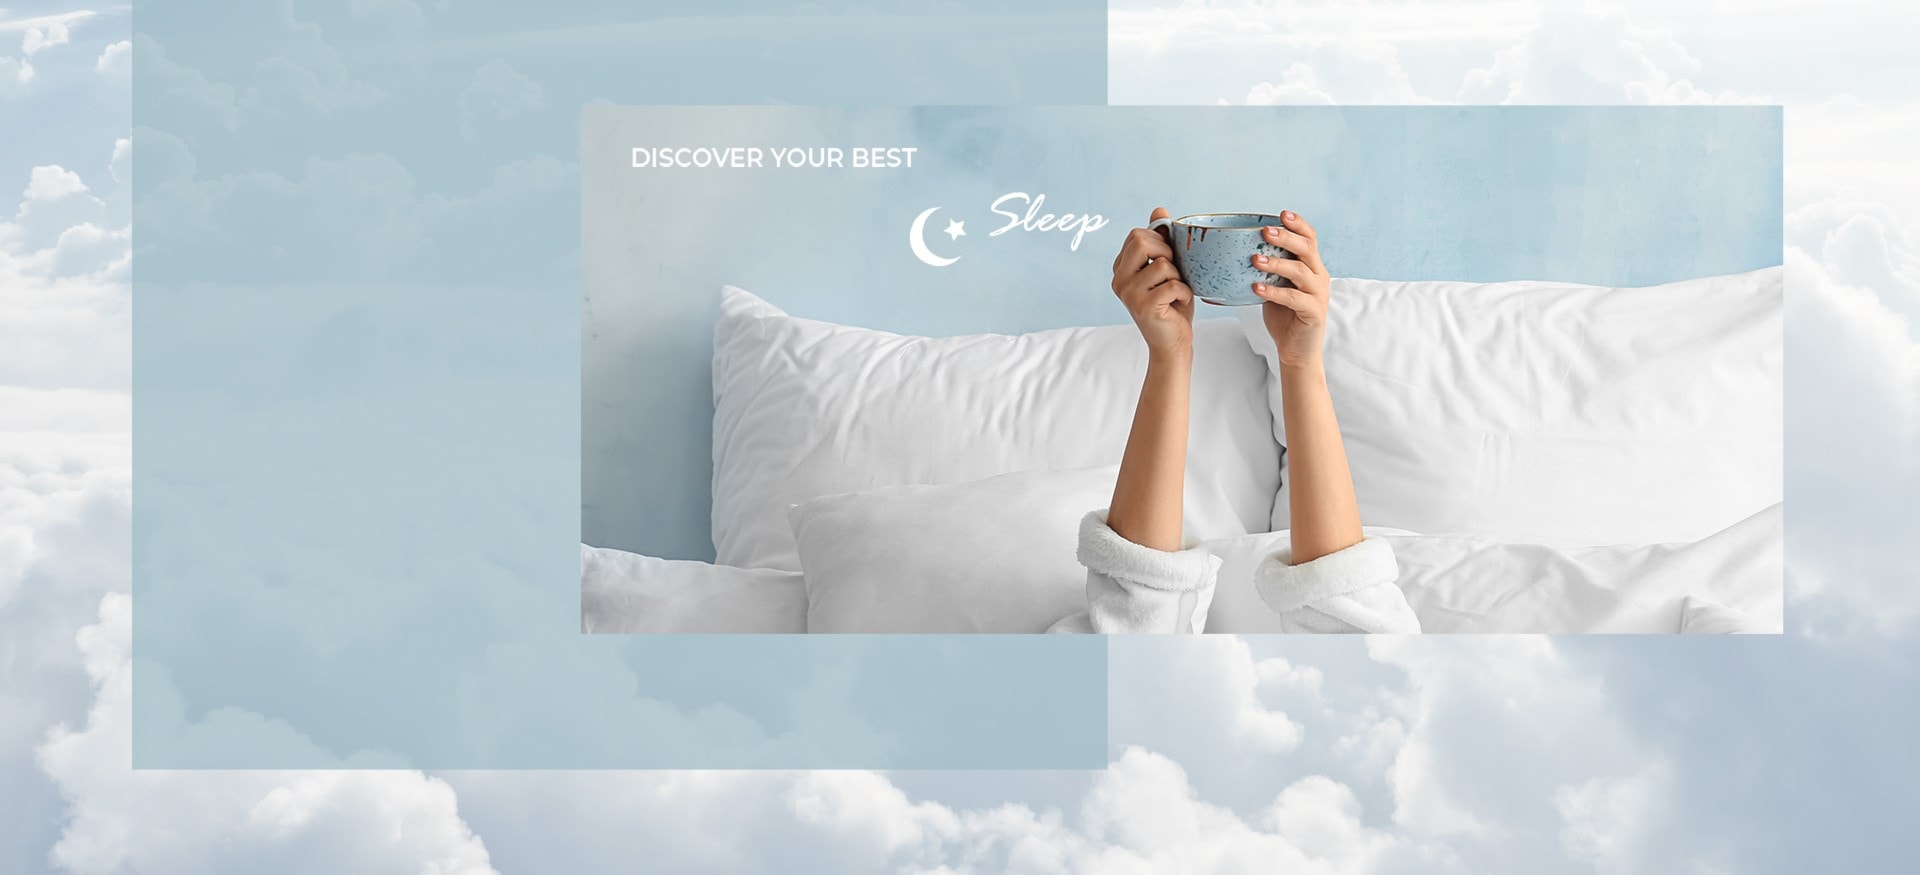 discover your best sleep